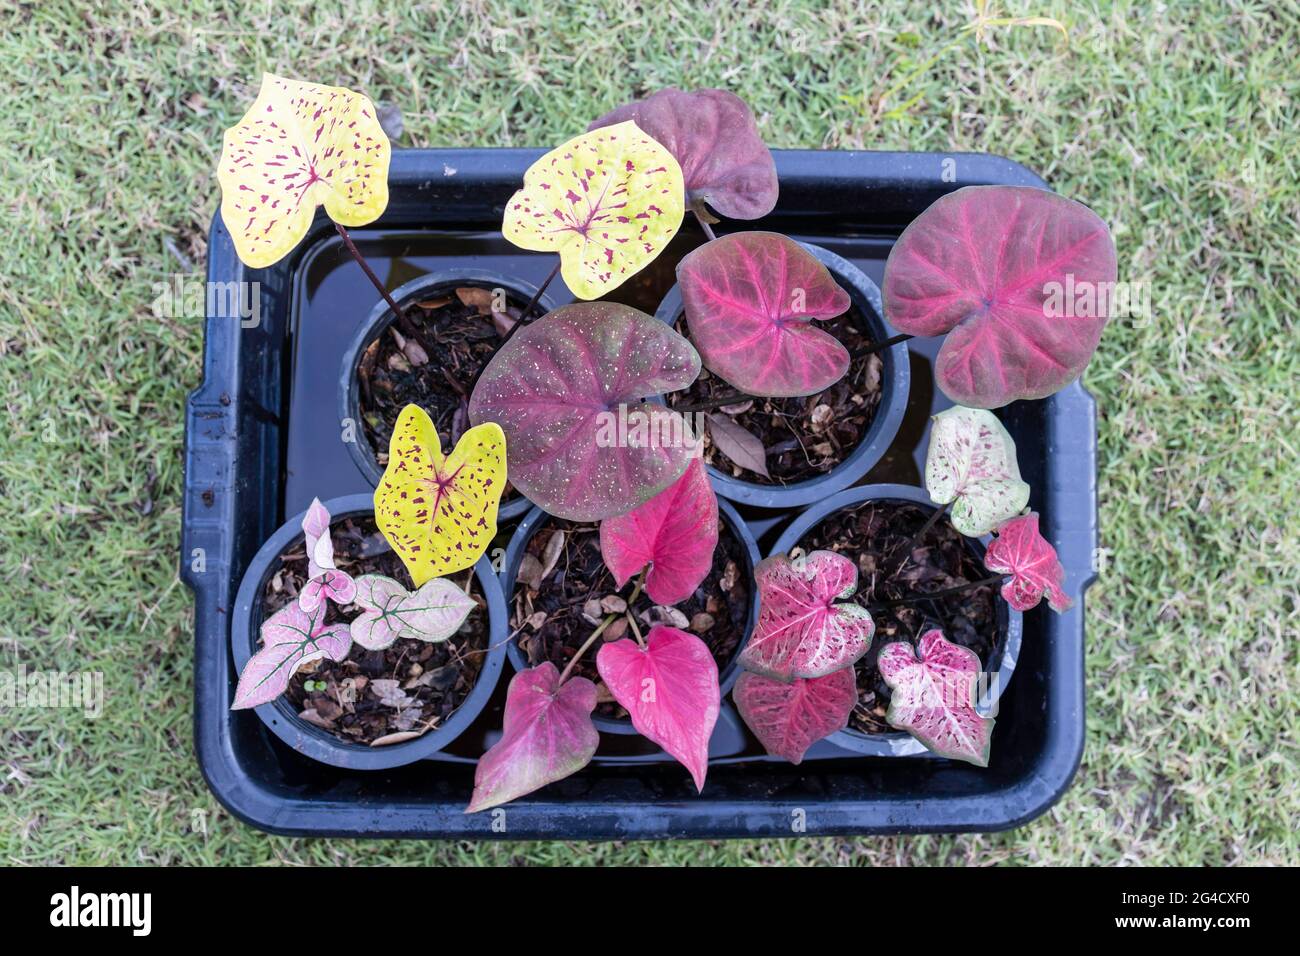 Many species of caladium with different leaf color characteristics are placed in a litter box. Stock Photo